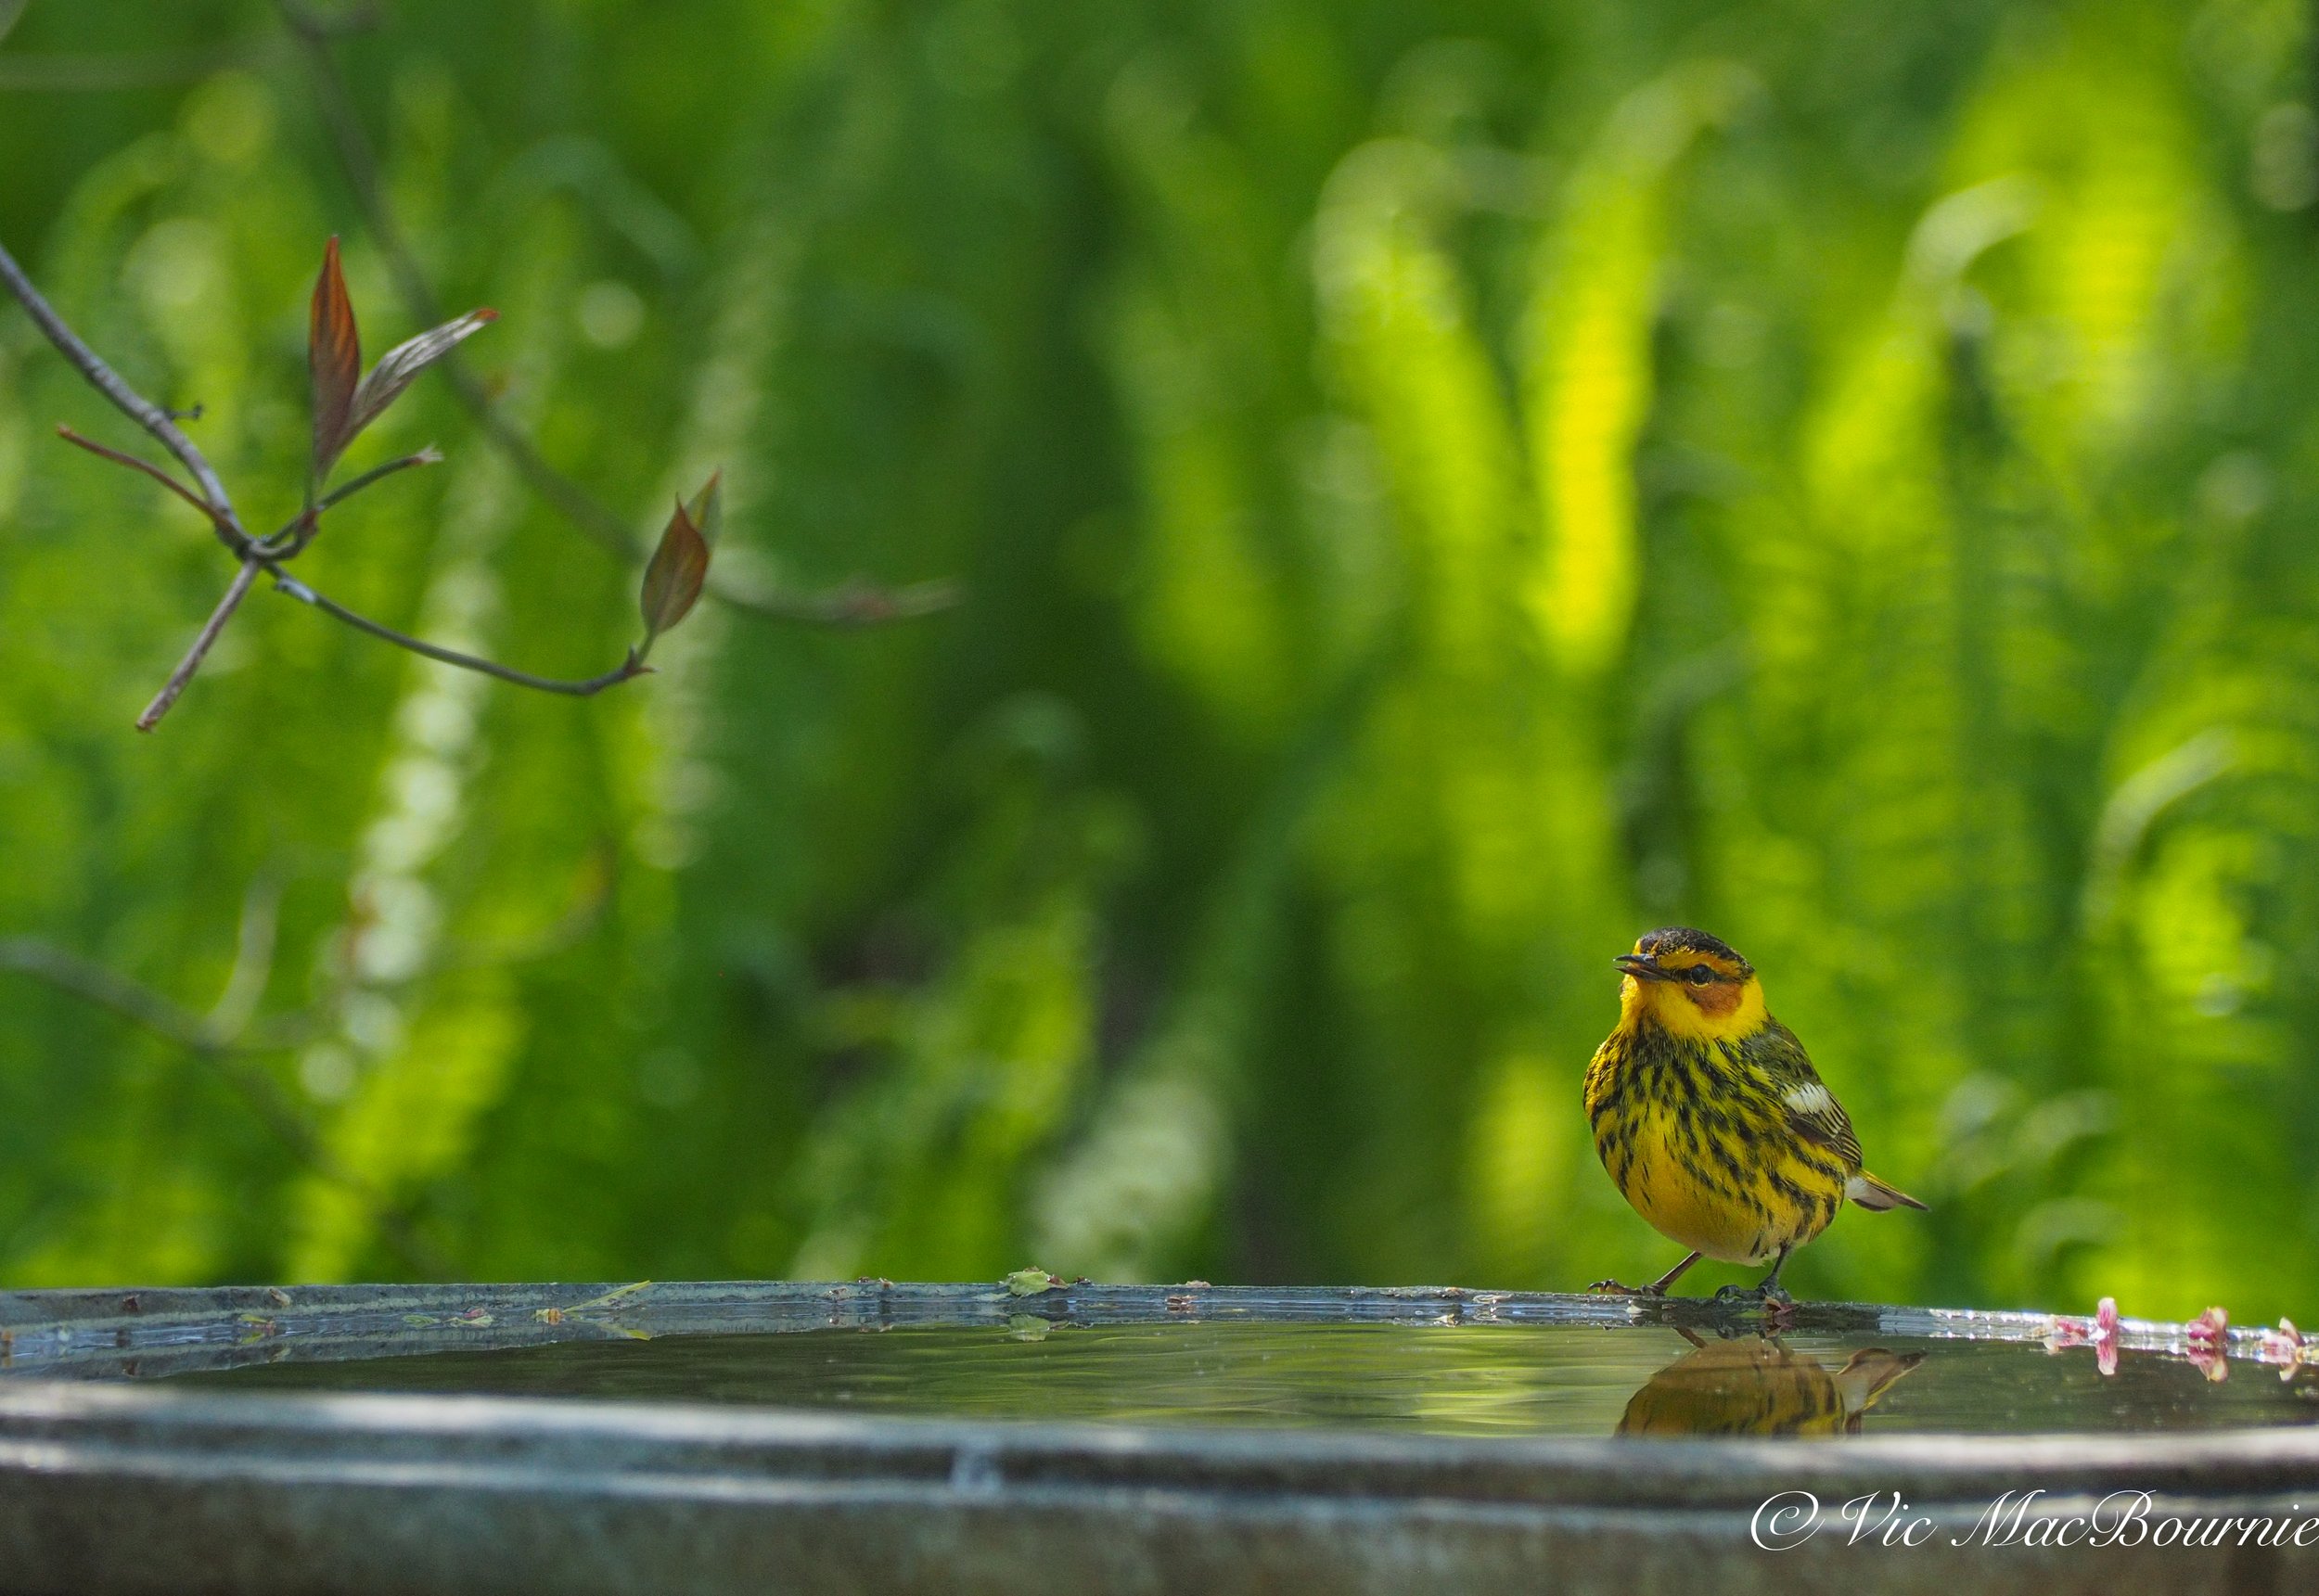 Cape May Warbler on bird bath photographed with Olympus EM-10 with the 40-150mm.